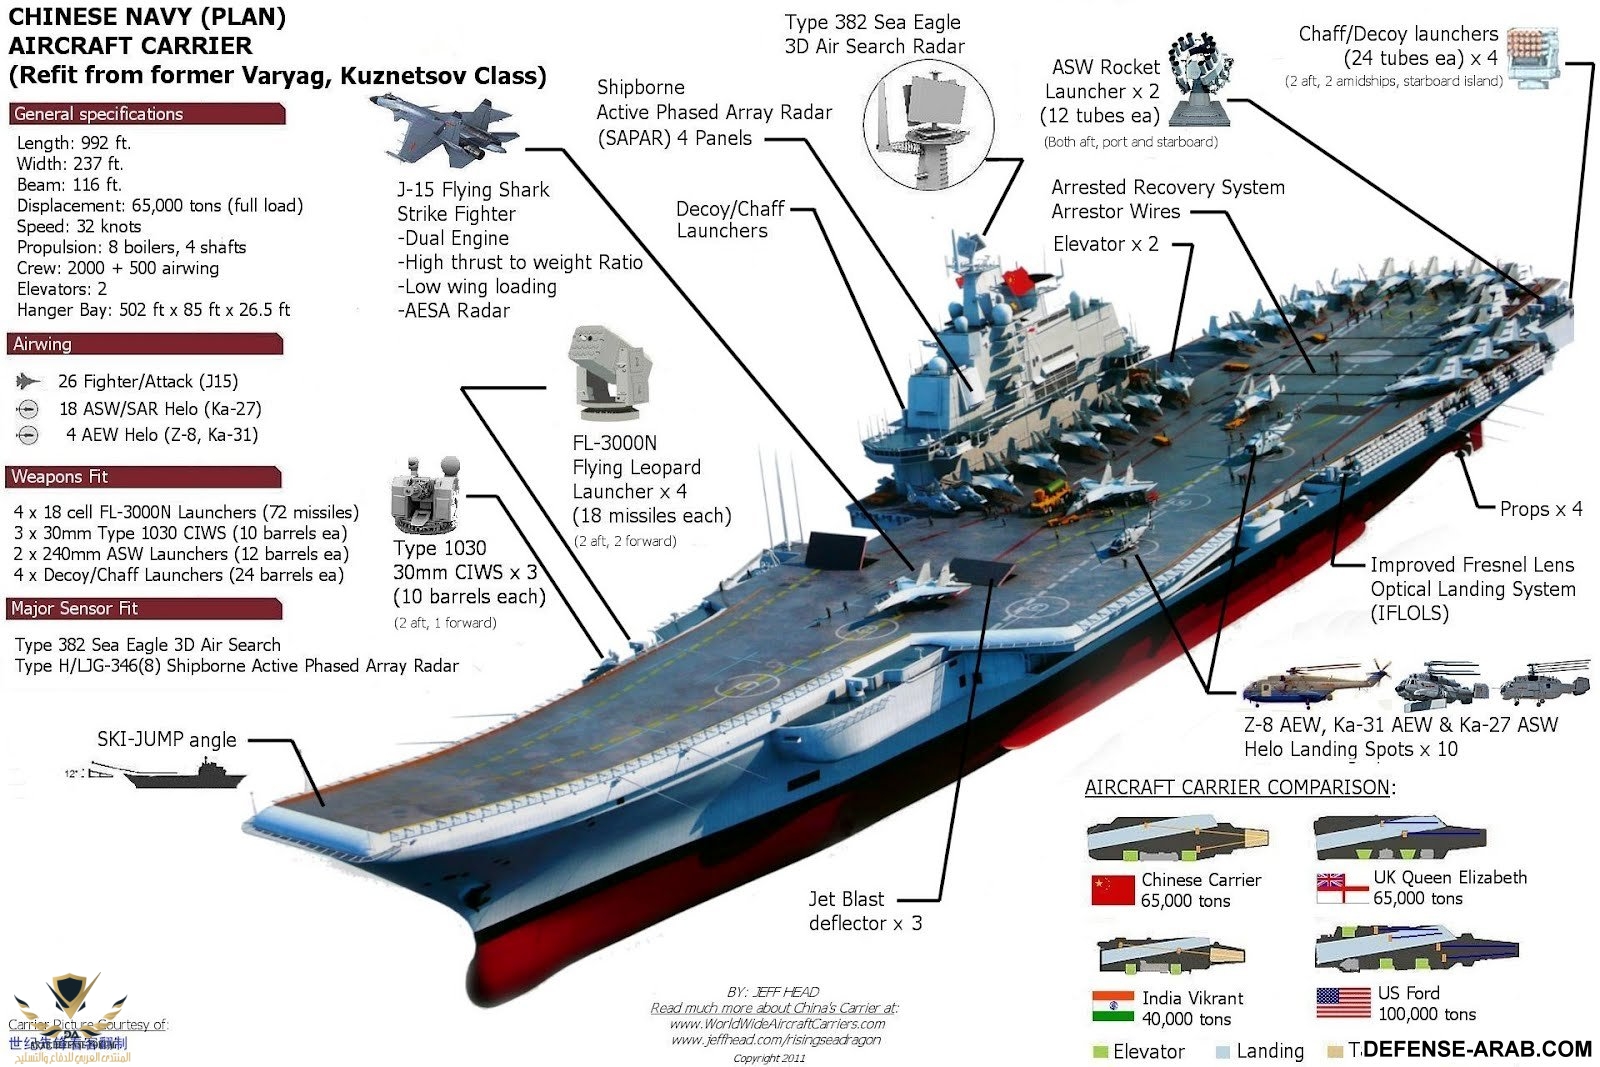 chinesecarrier-layout.jpg